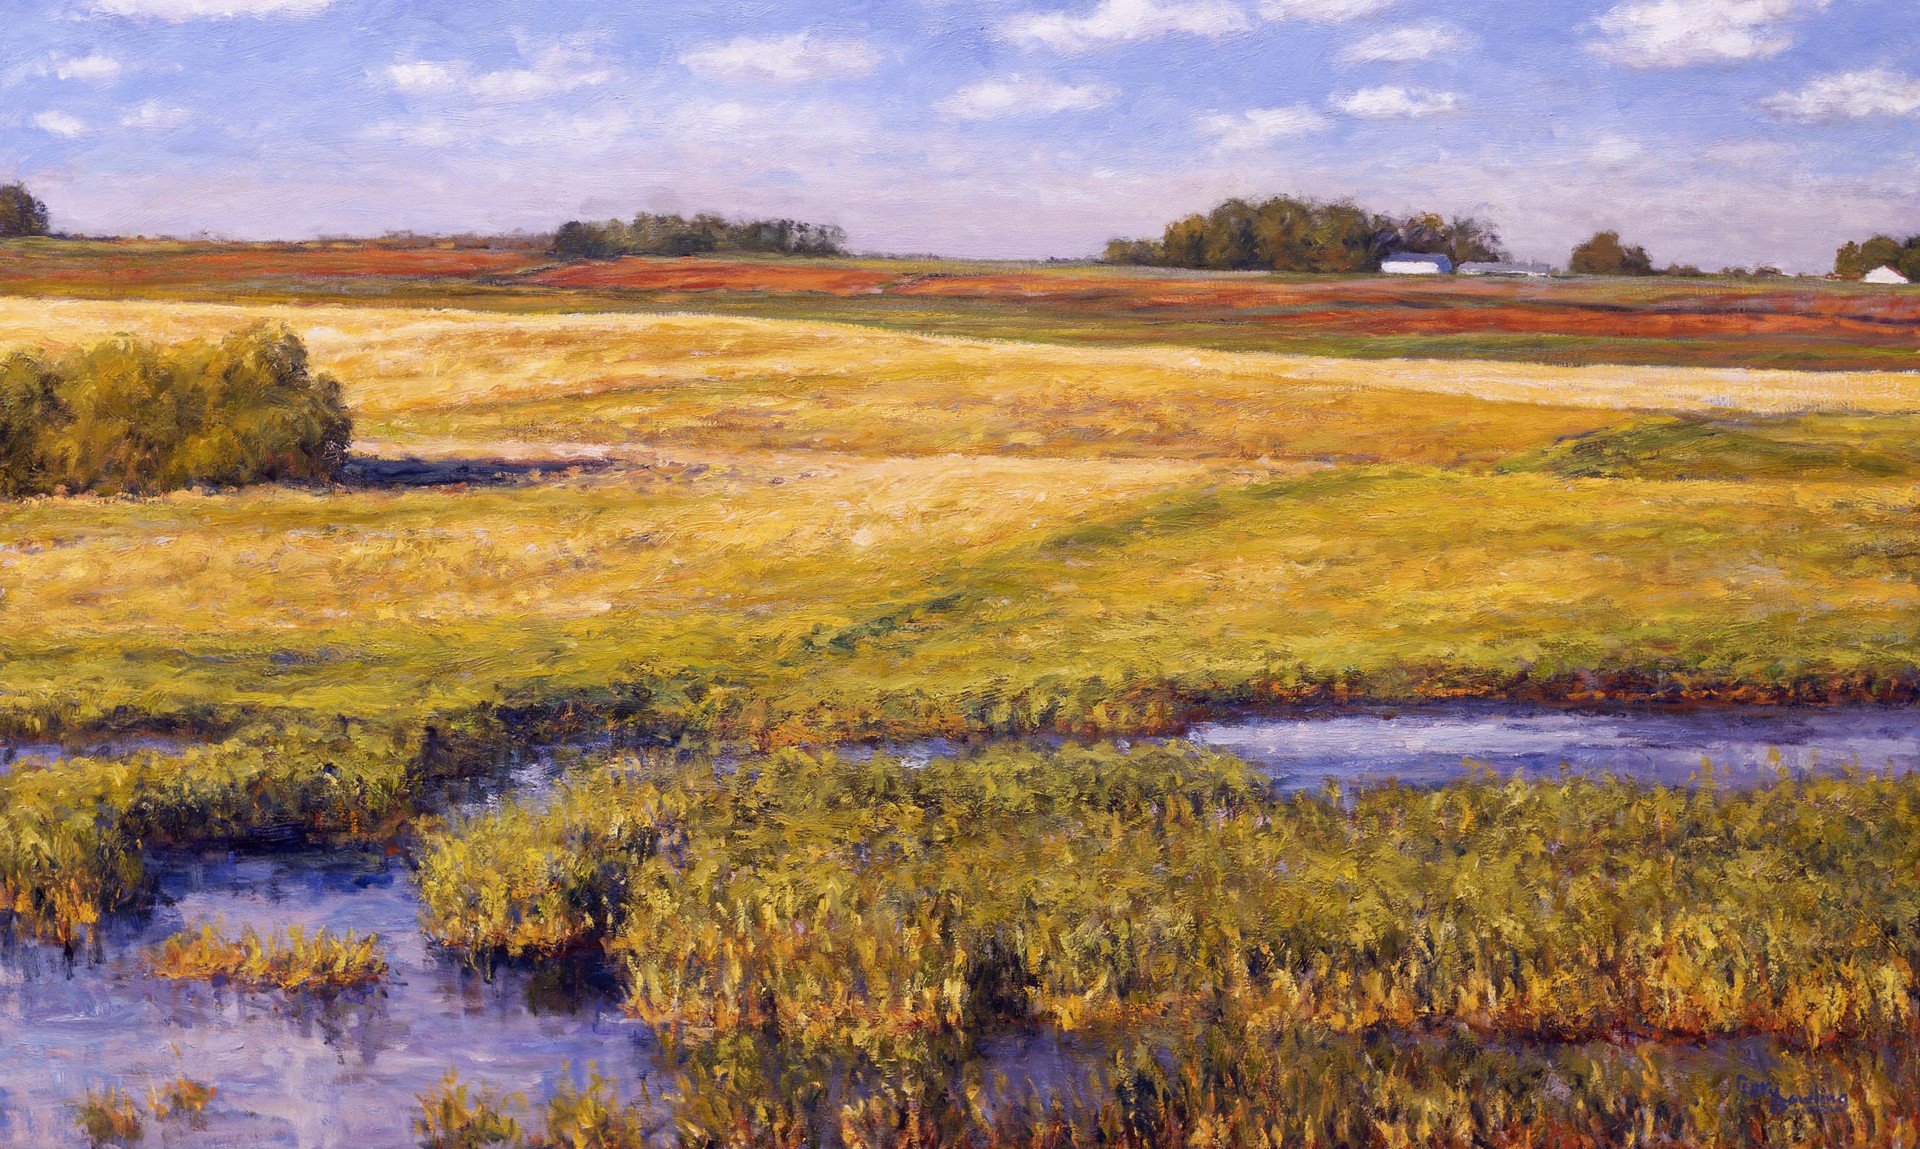 Boundary of Wetlands by Gary Bowling